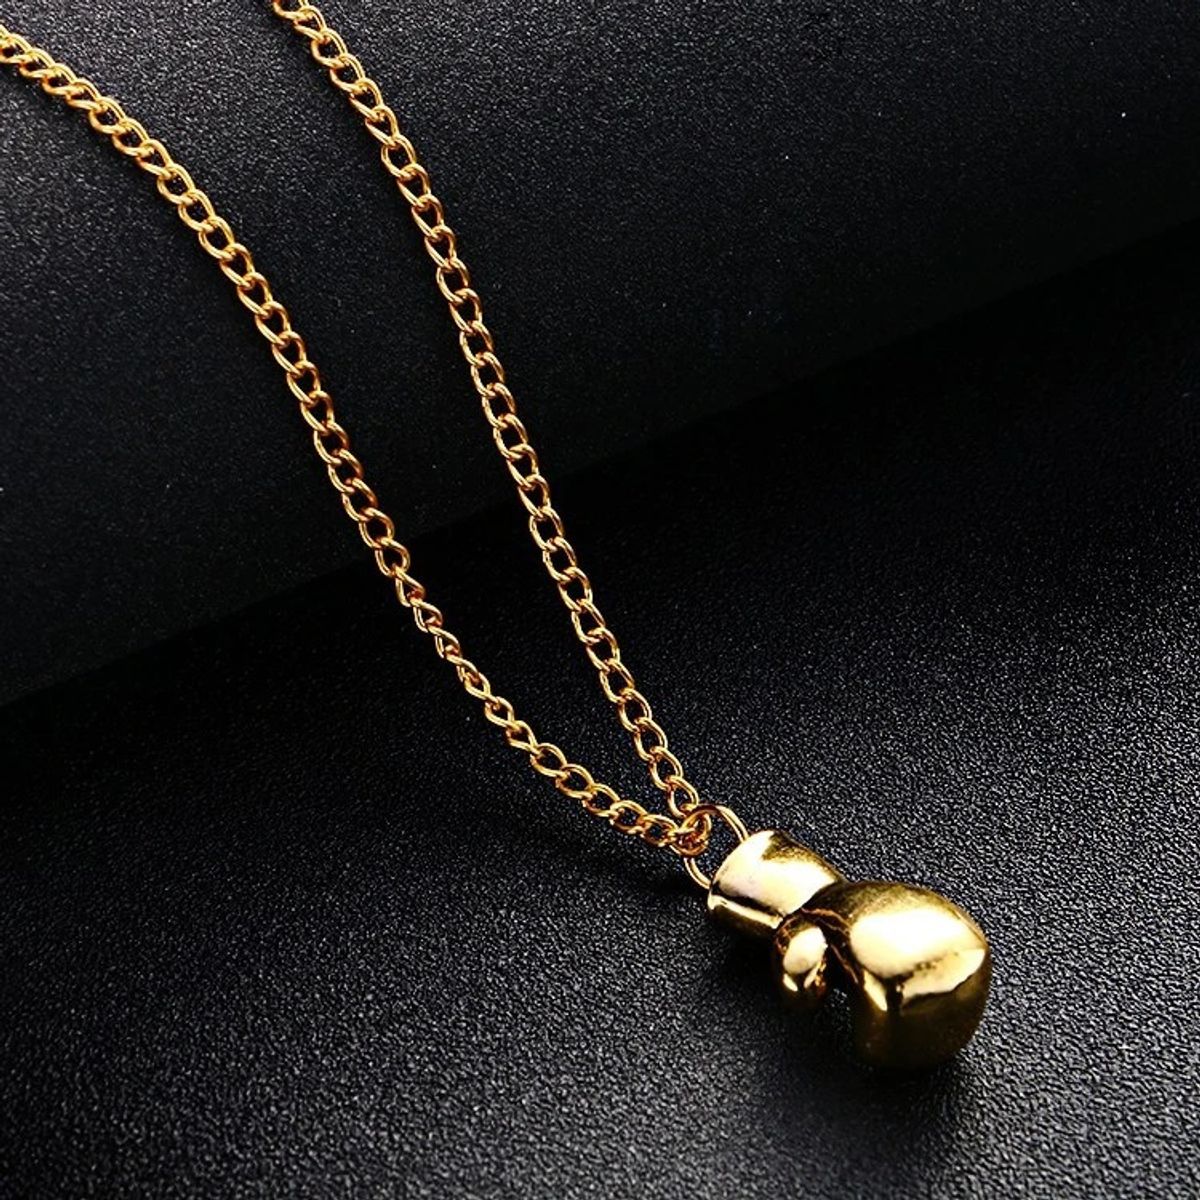 Boxing Glove Pendant - 14k Gold Boxing Glove Necklace